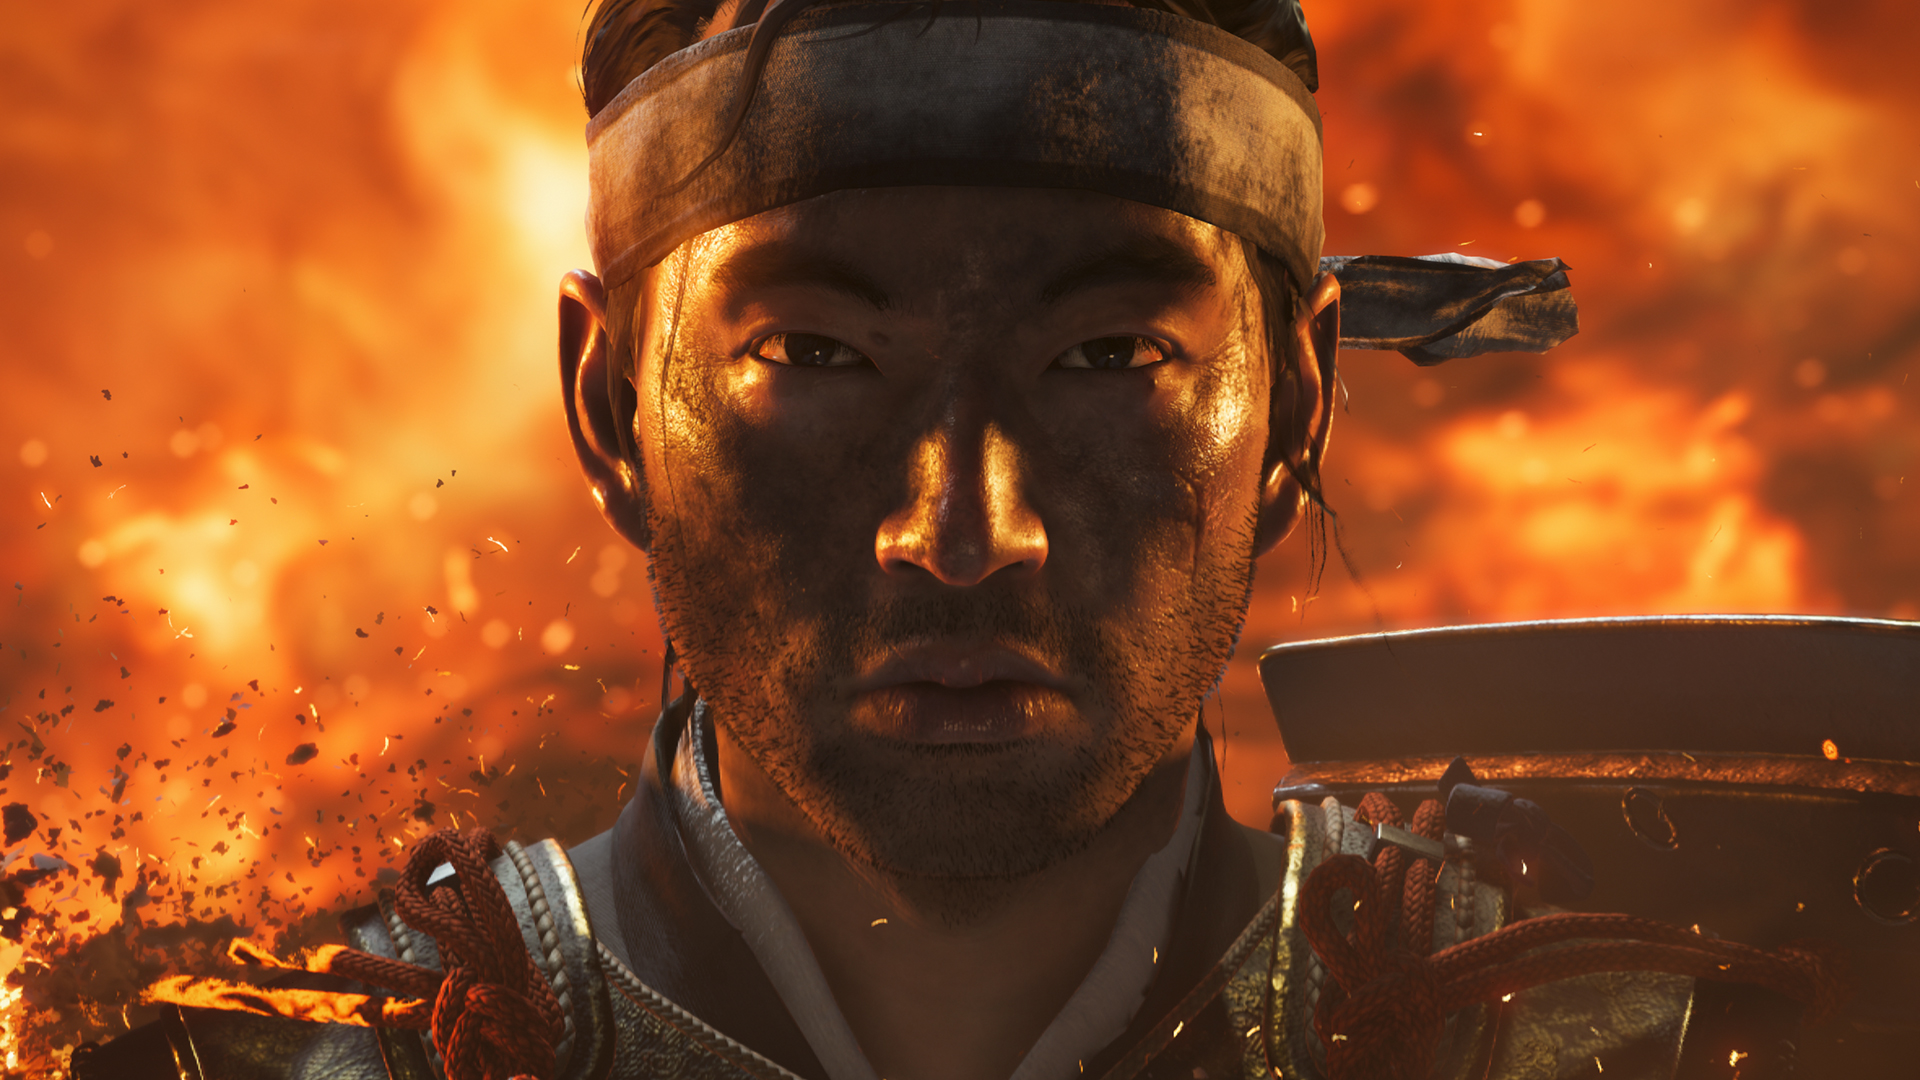 ghost of tsushima ps4 only